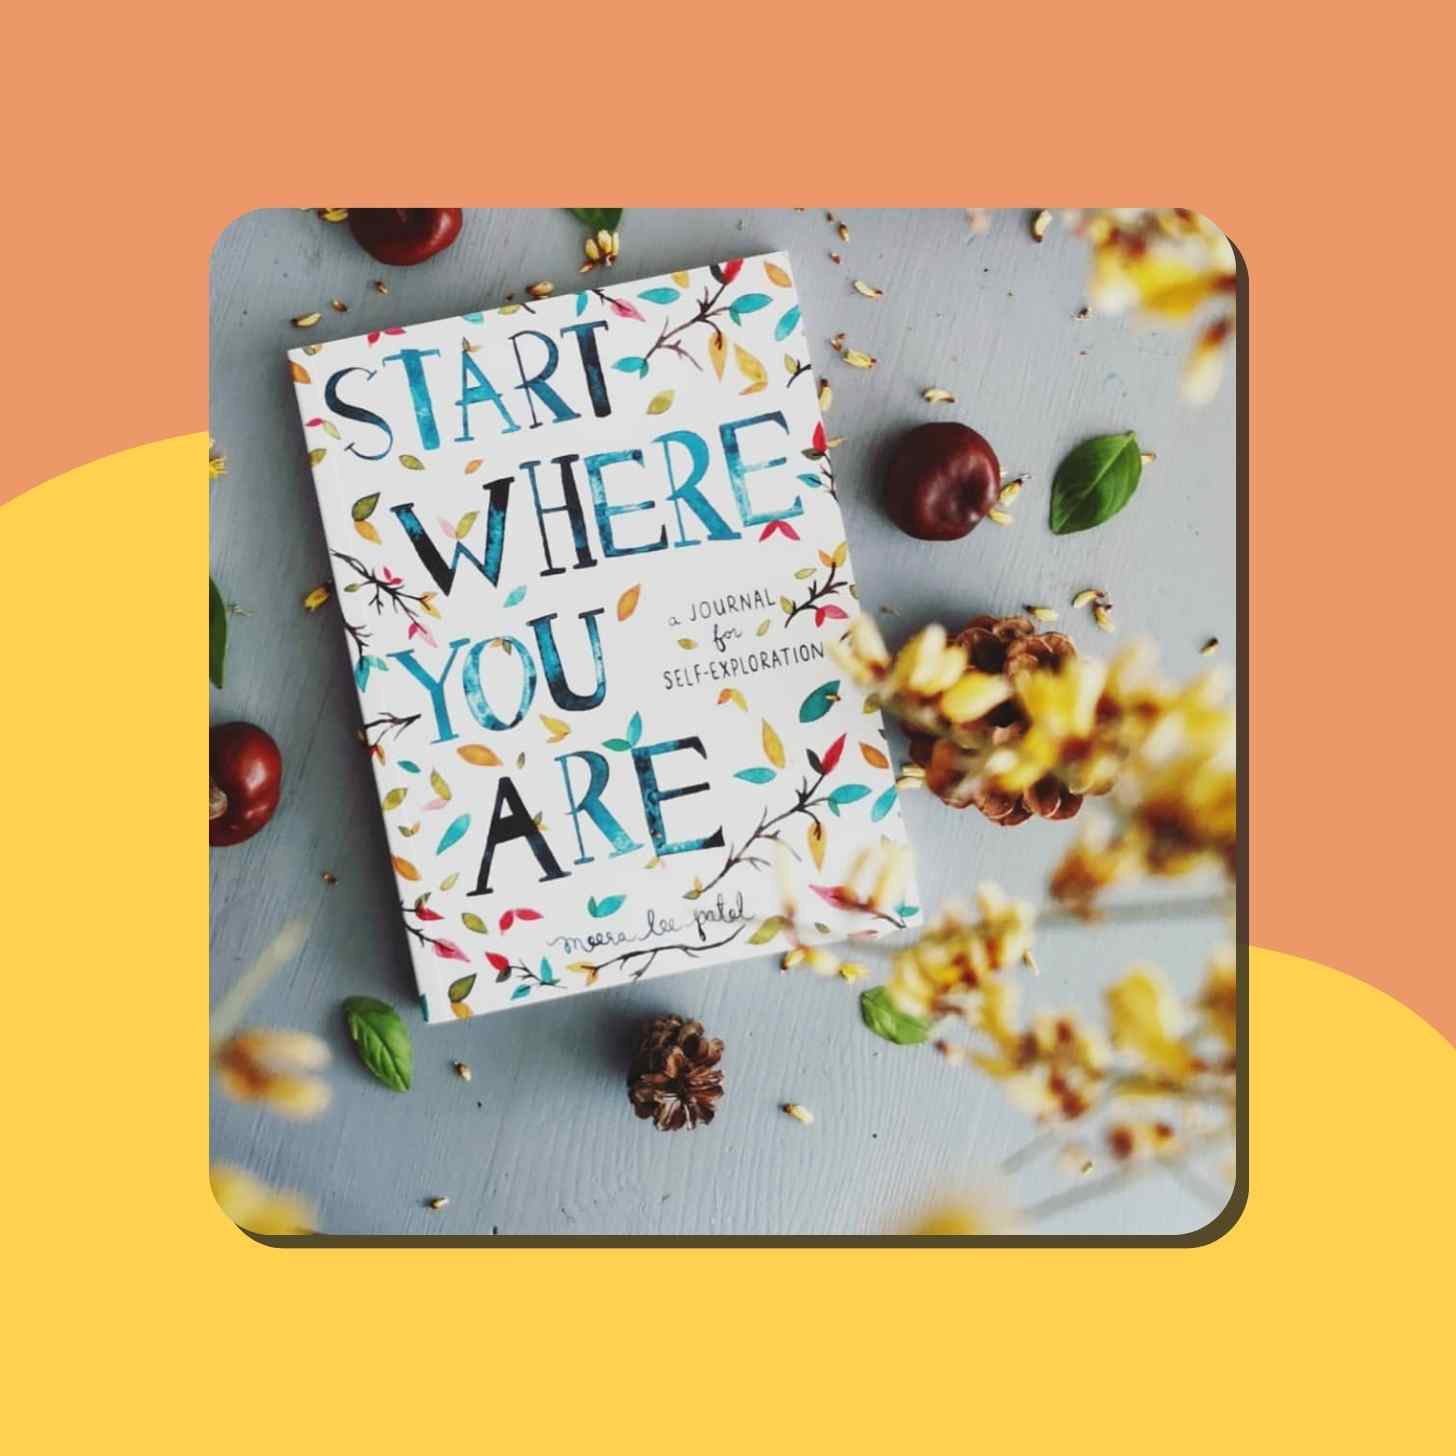 The Book "Start Where You Are" By Meera Lee Patel On Top Of A Table Next To Some Fruits And Leaves